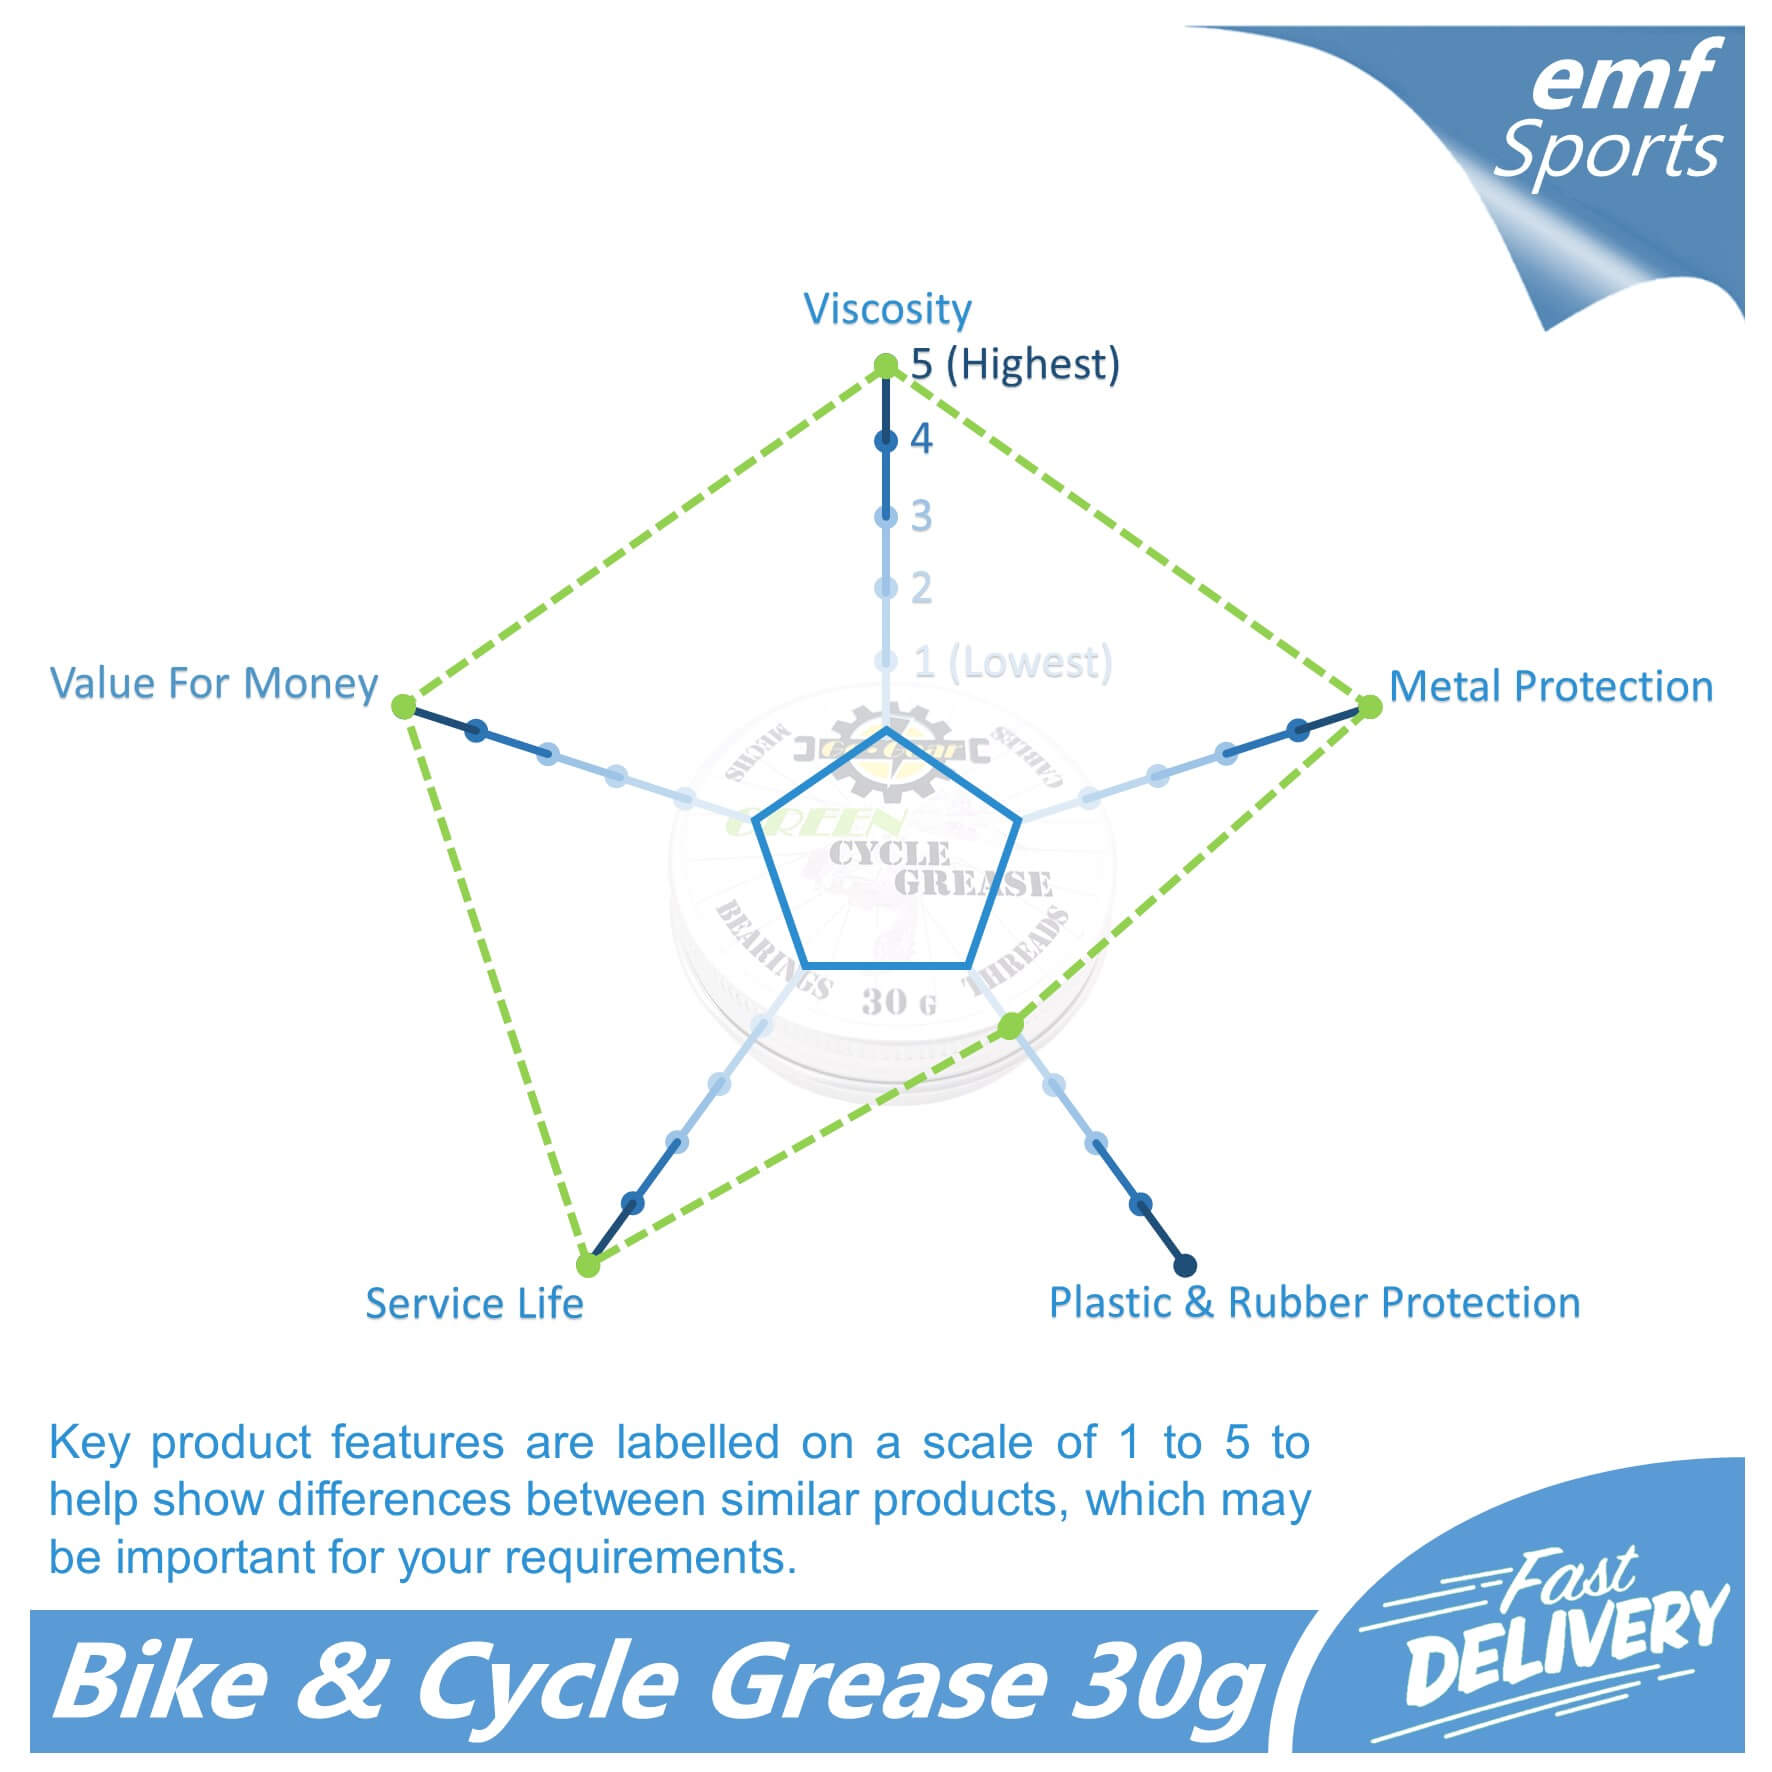 Green Cycle Grease Lubricant For Bike Gears, Bearings & Threads 30g